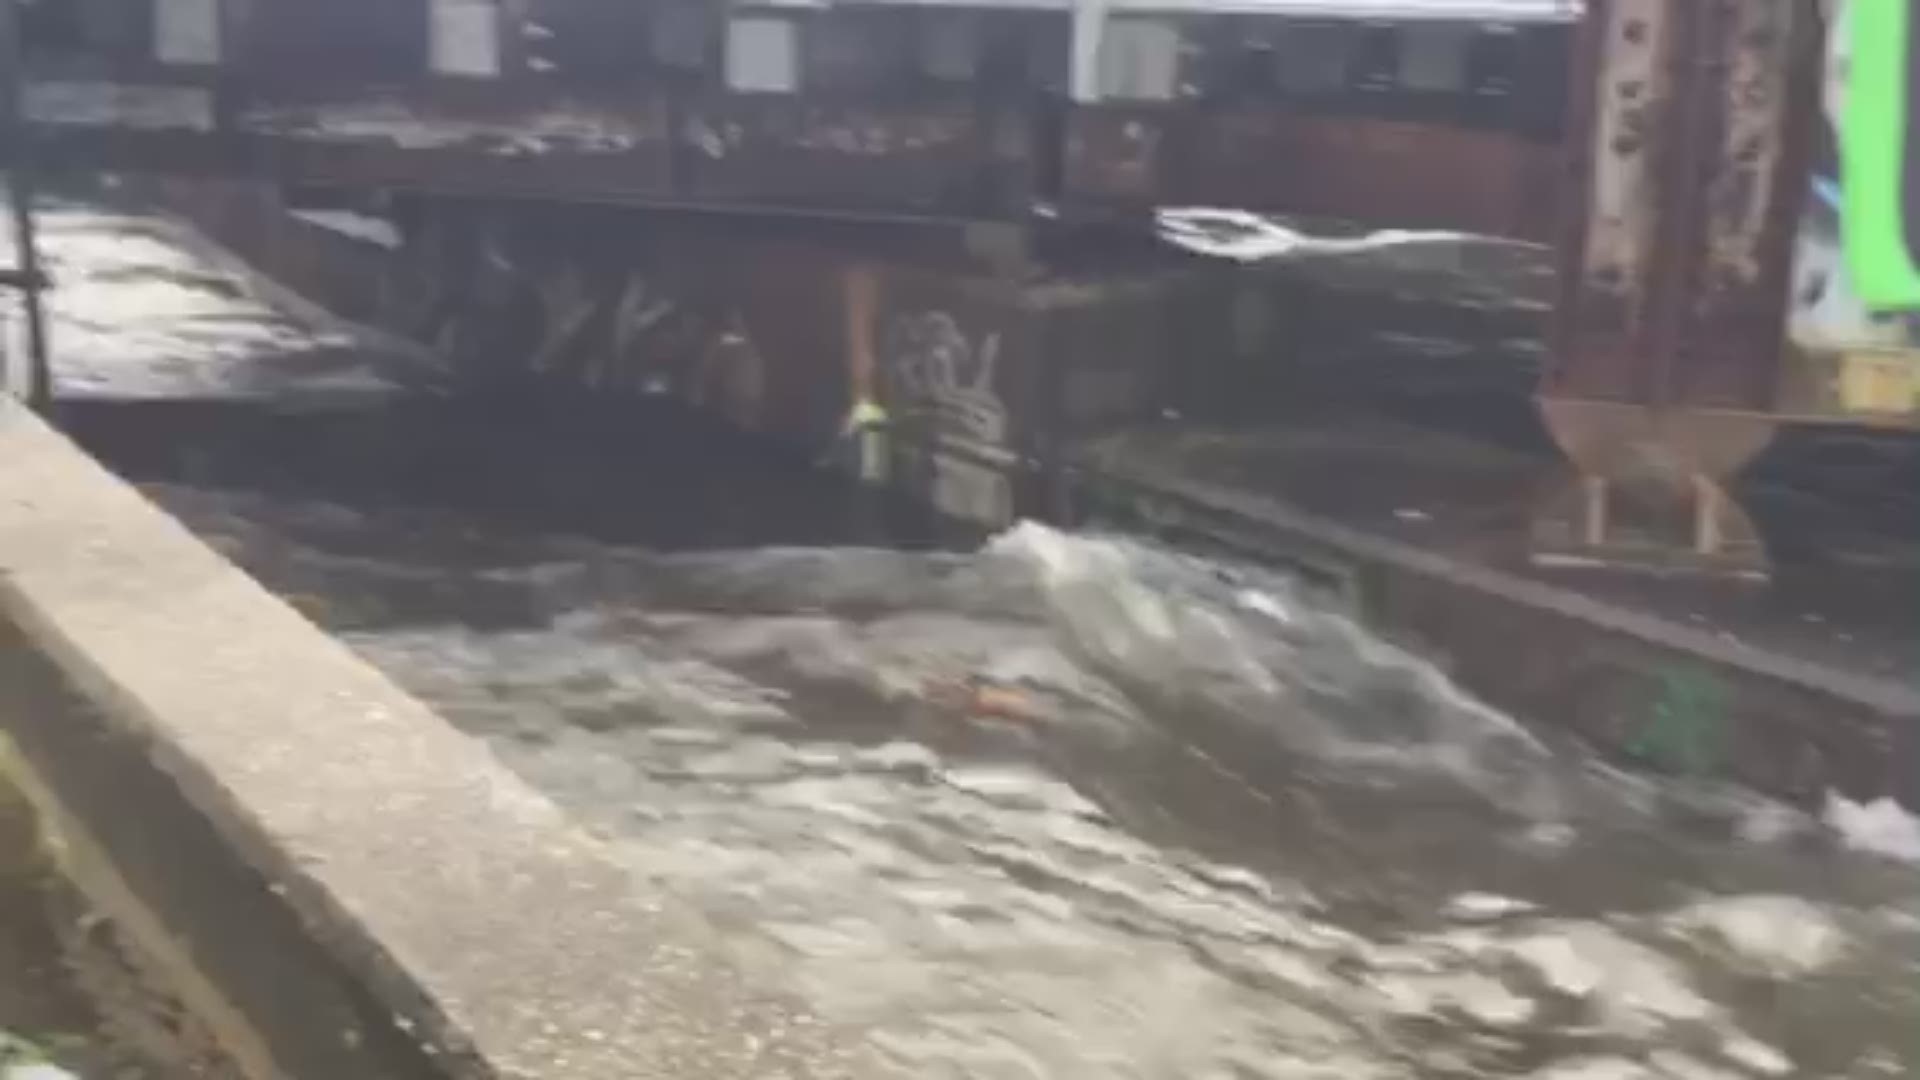 Viewer Bob Thornton sends this video of water rushing through the canal and the street blocked off due to high water near the Airline and Palmetto overpass.